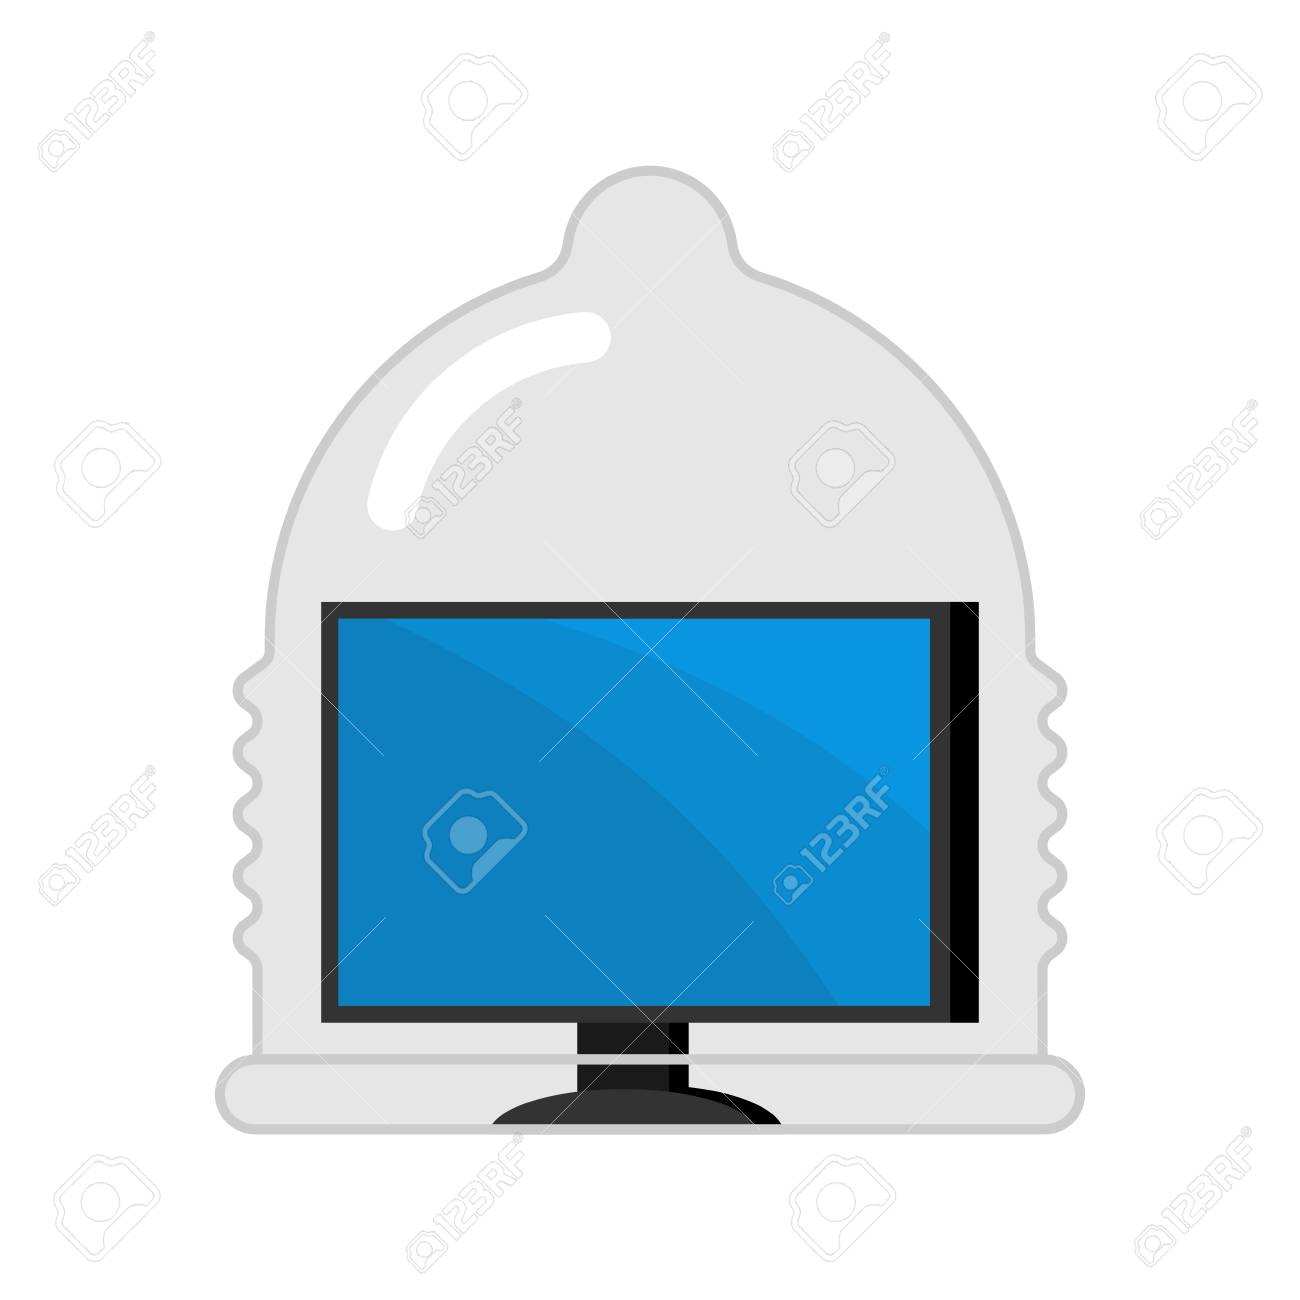 93688895-condom-computer-protection-pc-reliable-protection-against-viruses-vector-illustration.jpg